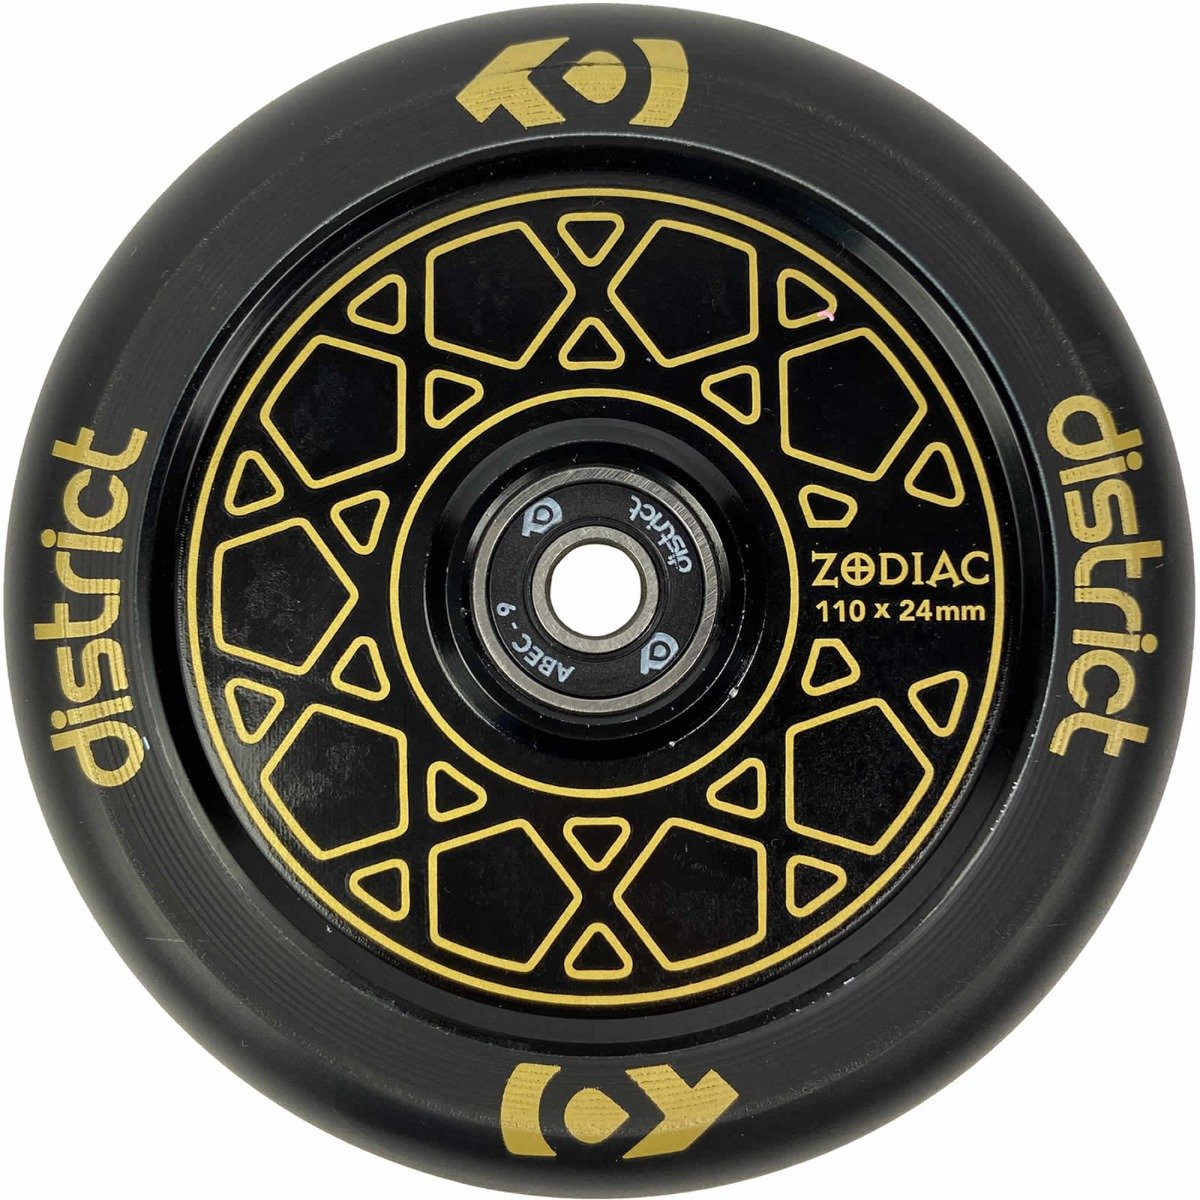 An image of District Zodiac Black Gold Stunt Scooter Wheels - 110mm